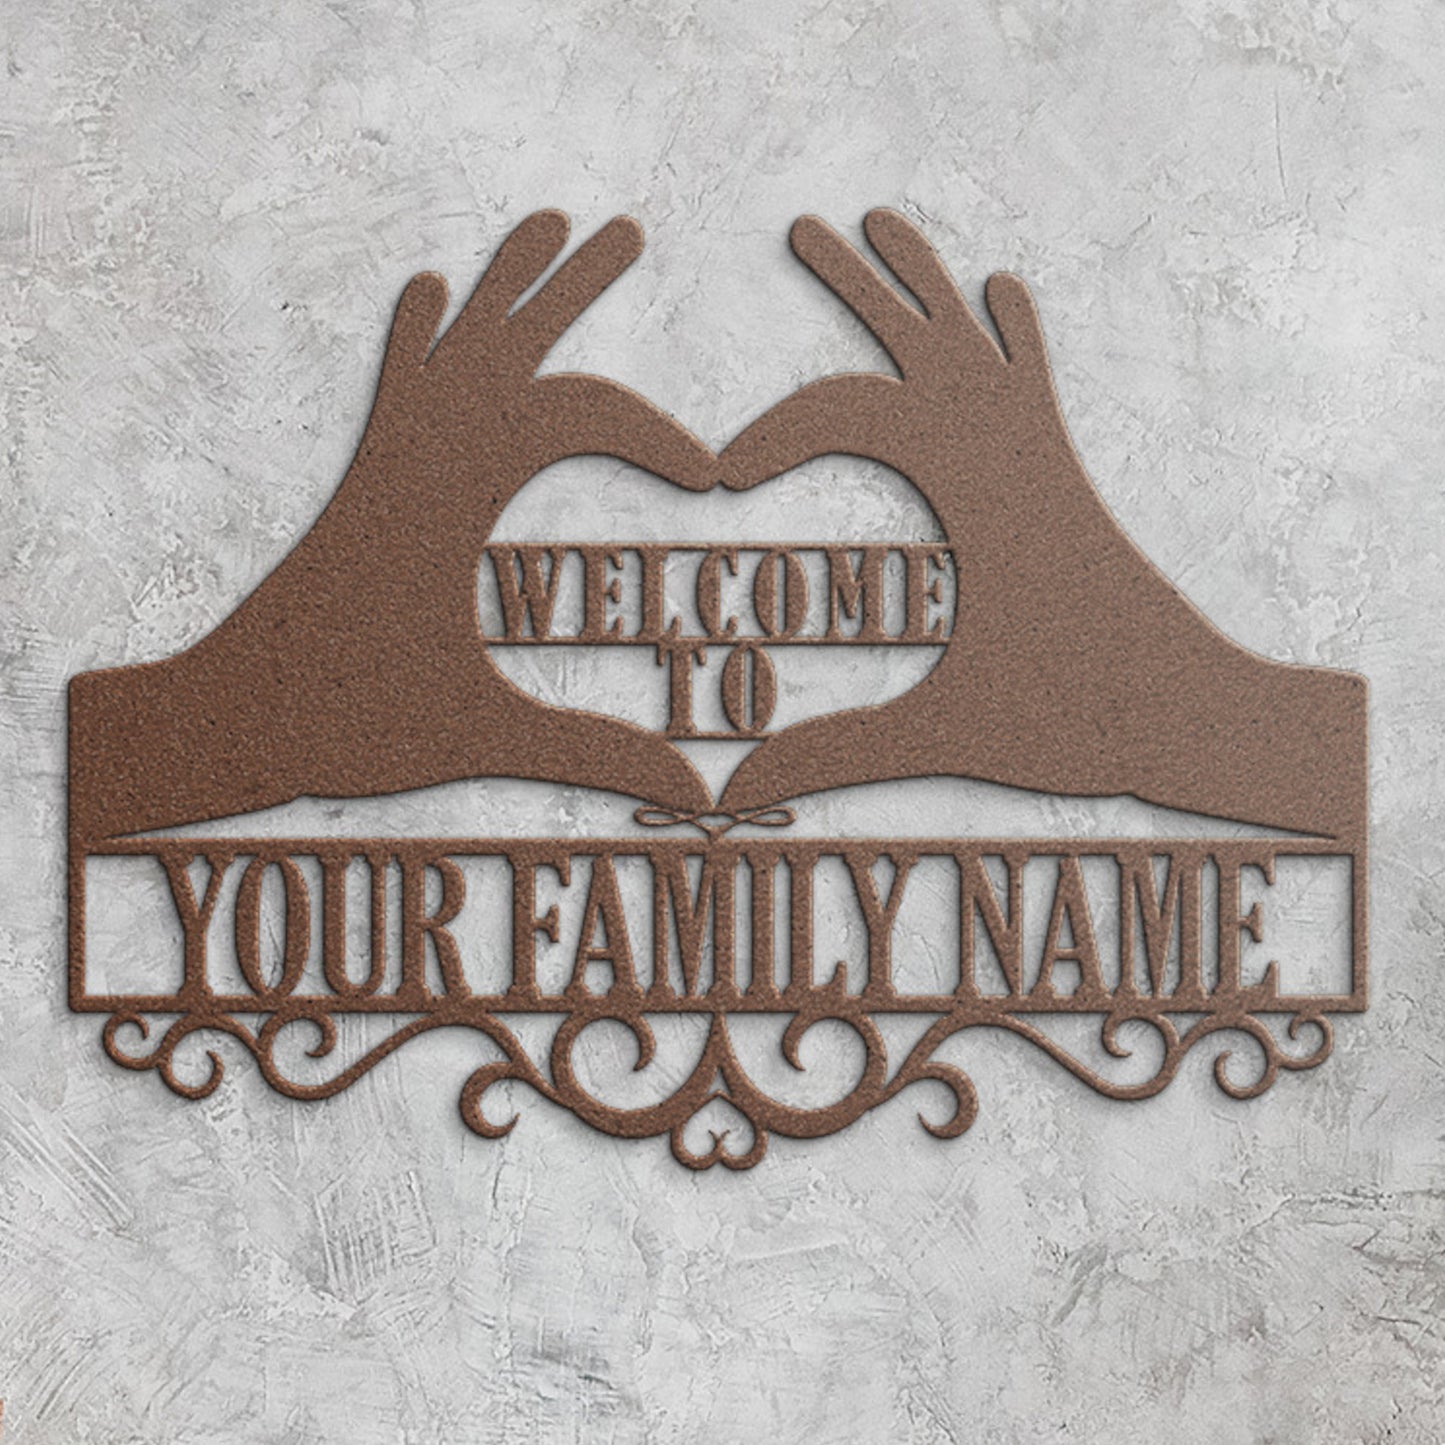 Personalized Family Name Metal Sign Gift. Custom House Welcome Wall Decor. Last Name Wall Decor. House Address Sign. Family Love Decoration